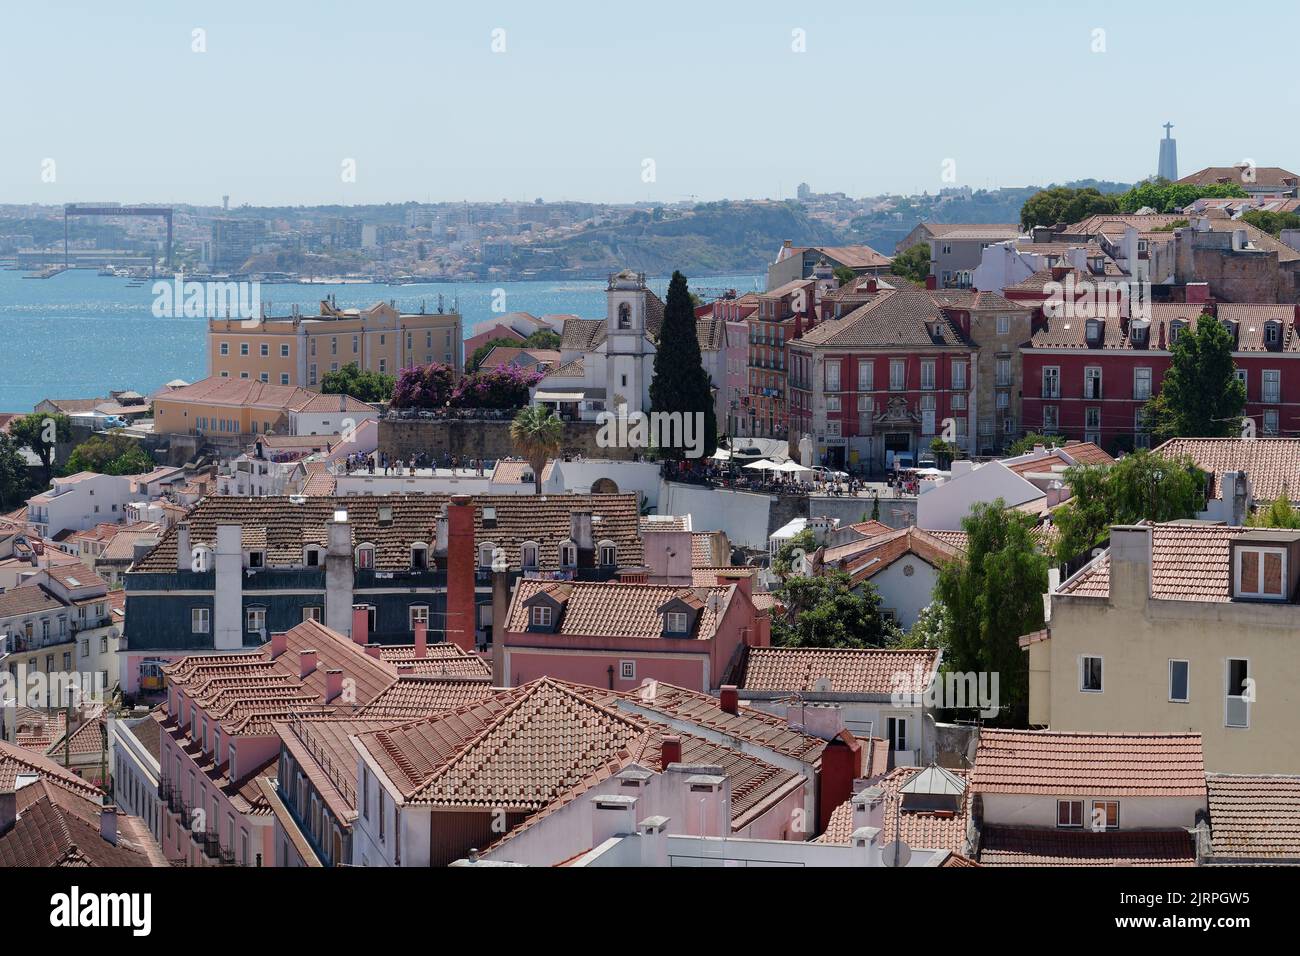 View over rooftops in Lisbon towards the River Tagus, from the Monastery of São Vicente de Fora. Stock Photo